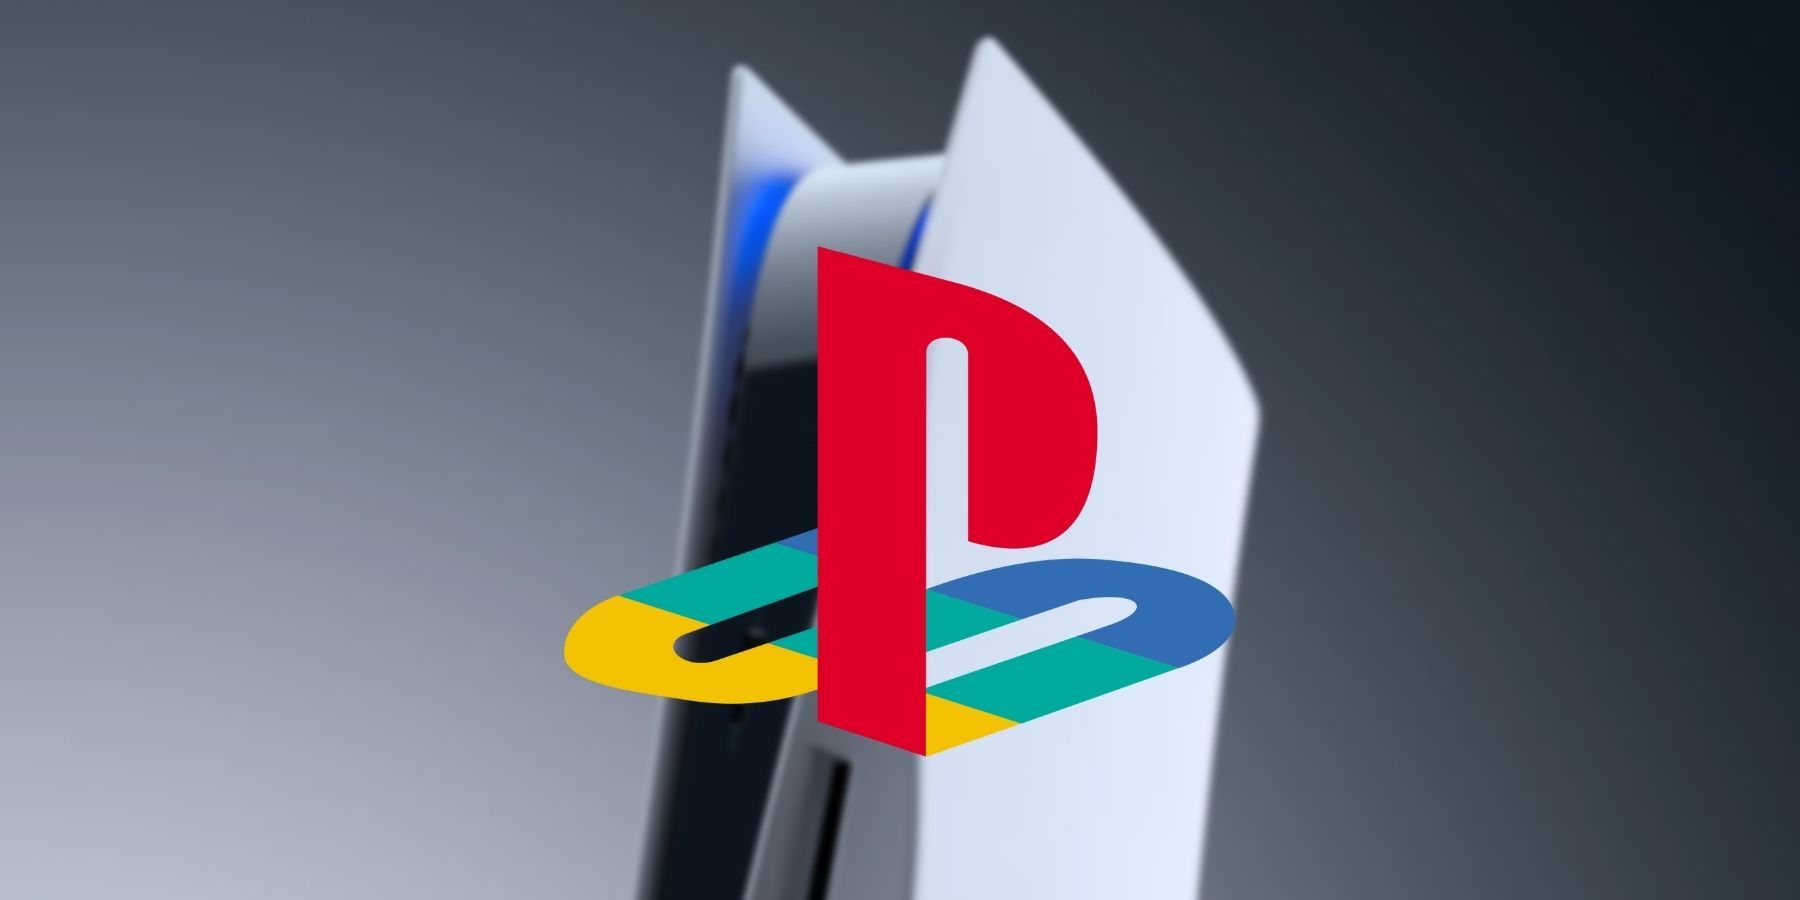 PS5 Pro is the worst idea possible for PlayStation at the moment